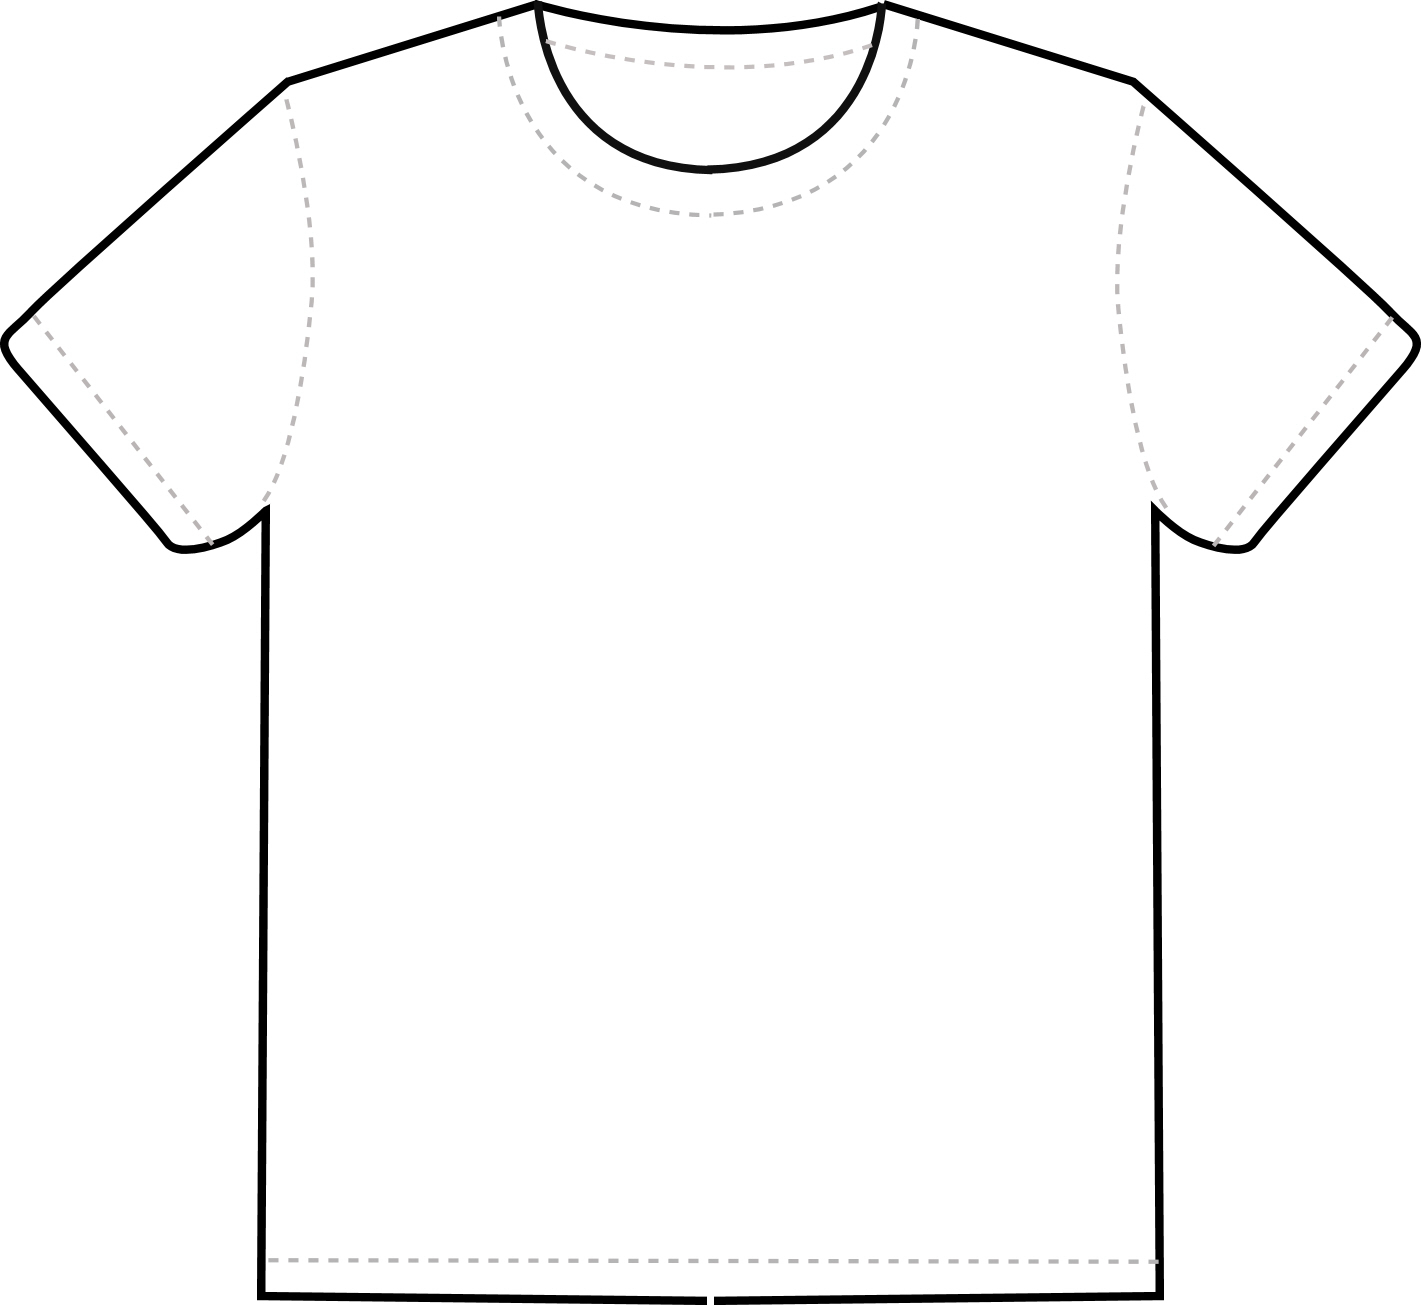 Free Tshirt Template, Download Free Tshirt Template Png Images ...